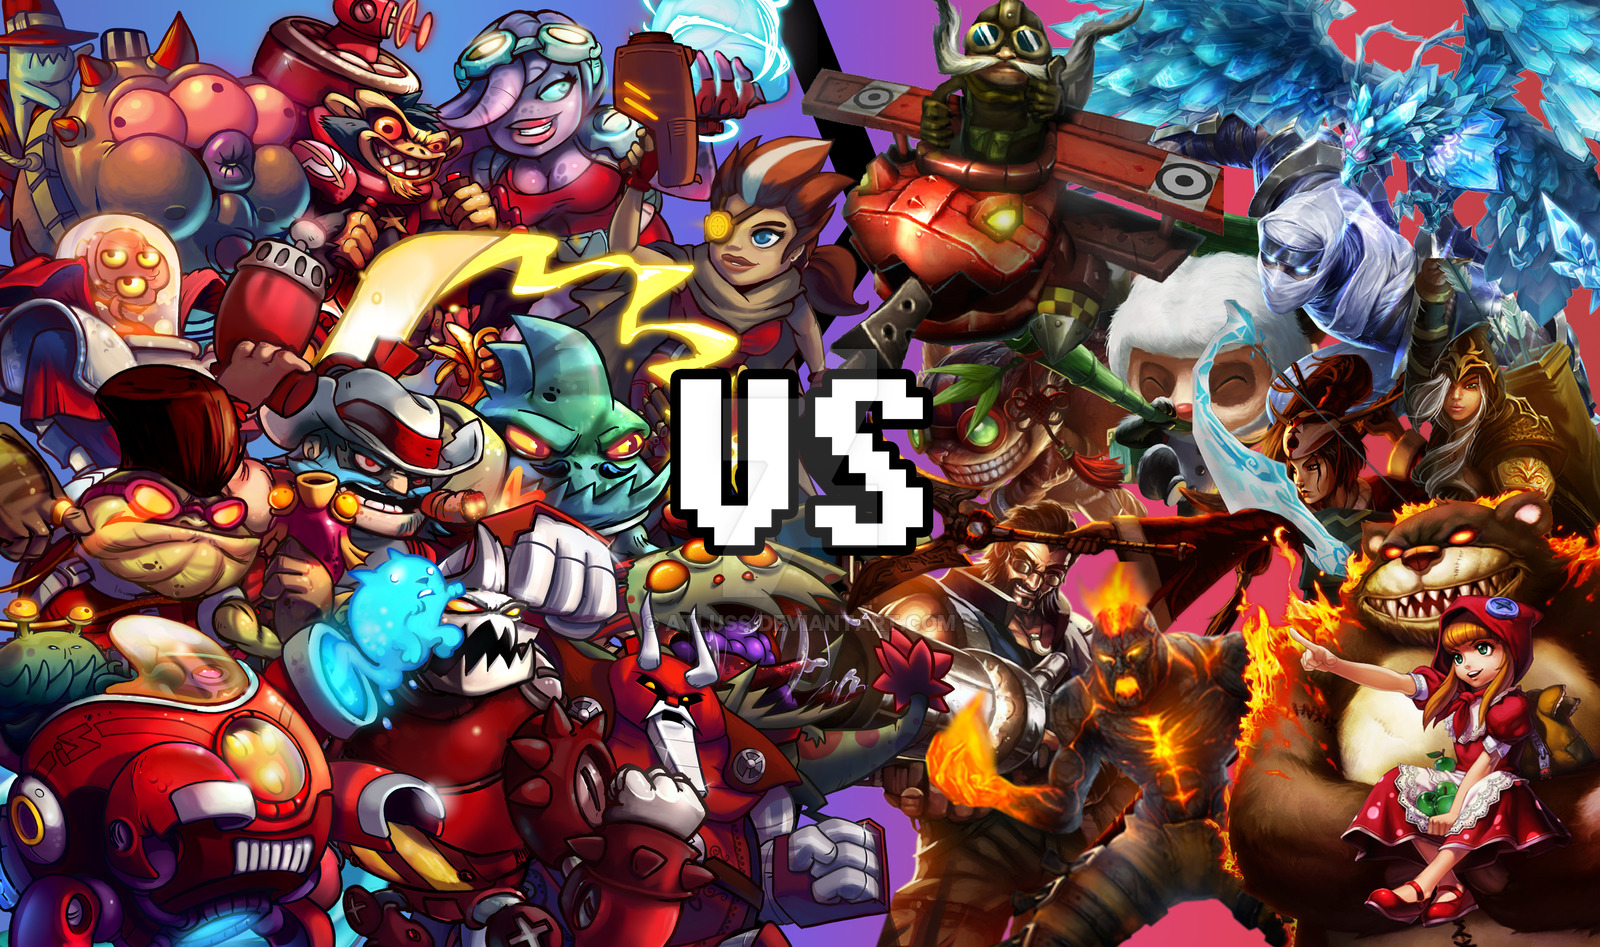 Awesomenauts Vs League Of Legends By Atluss